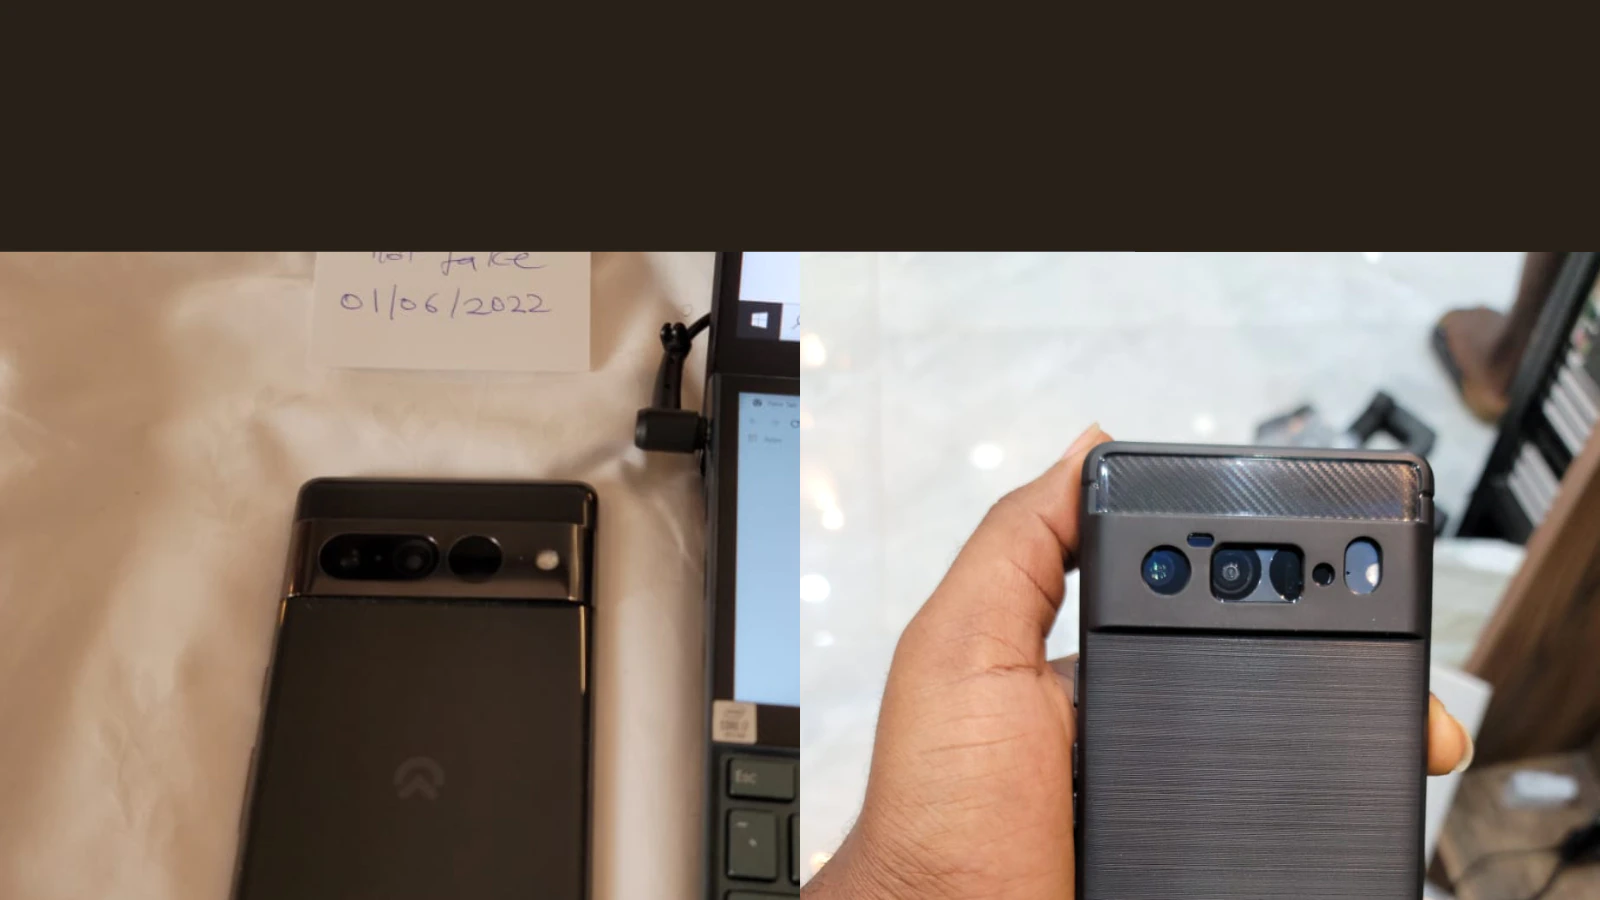 Man Claims To Have Received Pixel 7 Pro Instead Of Pixel 6 Pro In Ghana: Here’s The Full Story